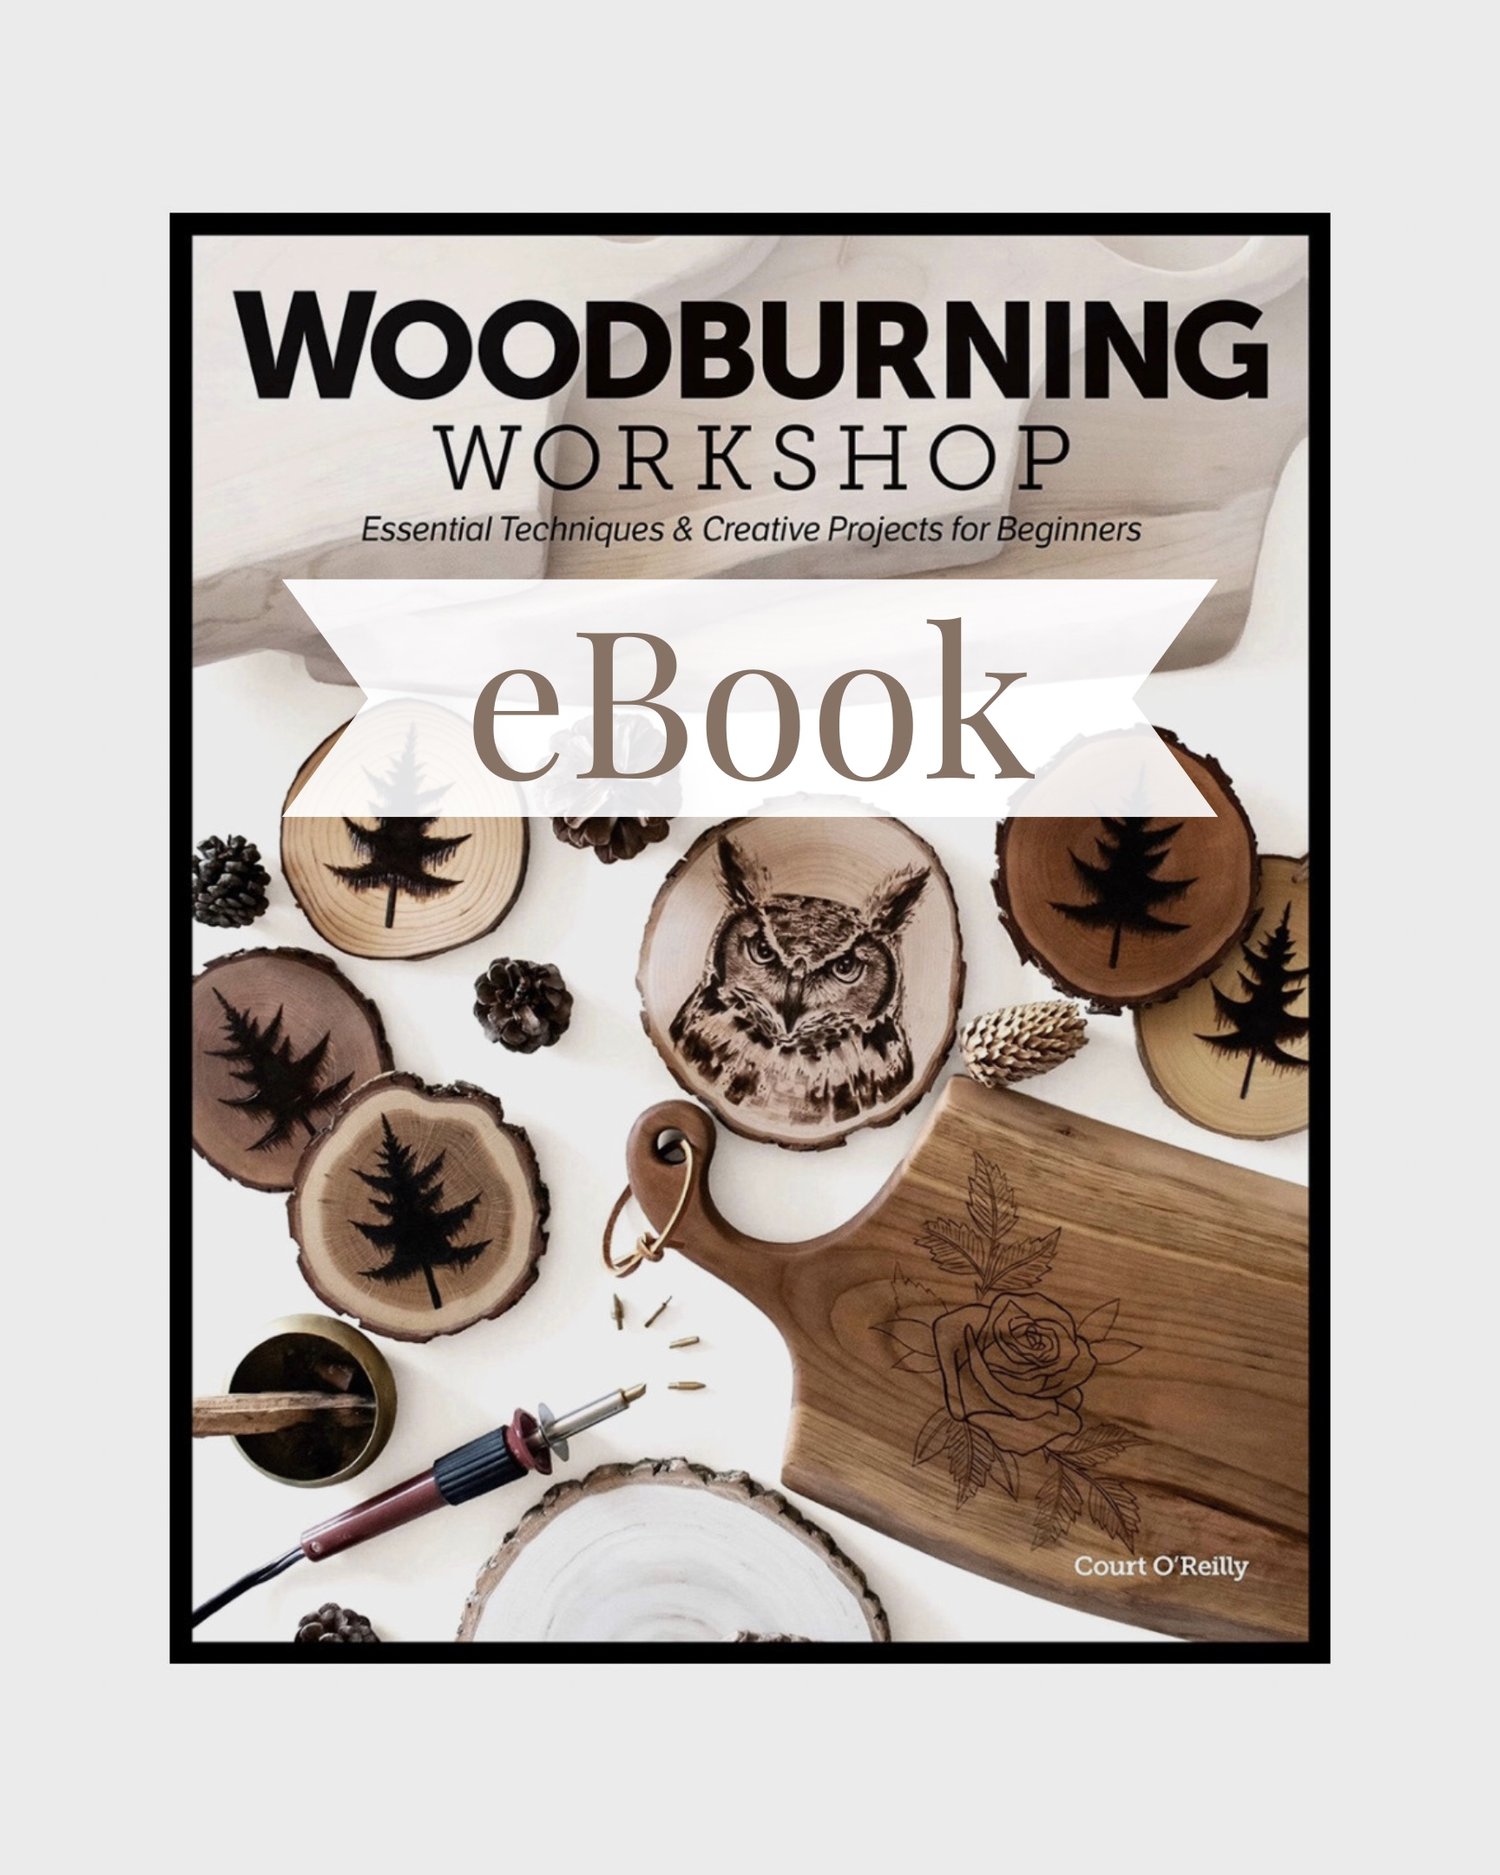 INTRODUCING: The Creative Woodburner by Walnut Hollow 